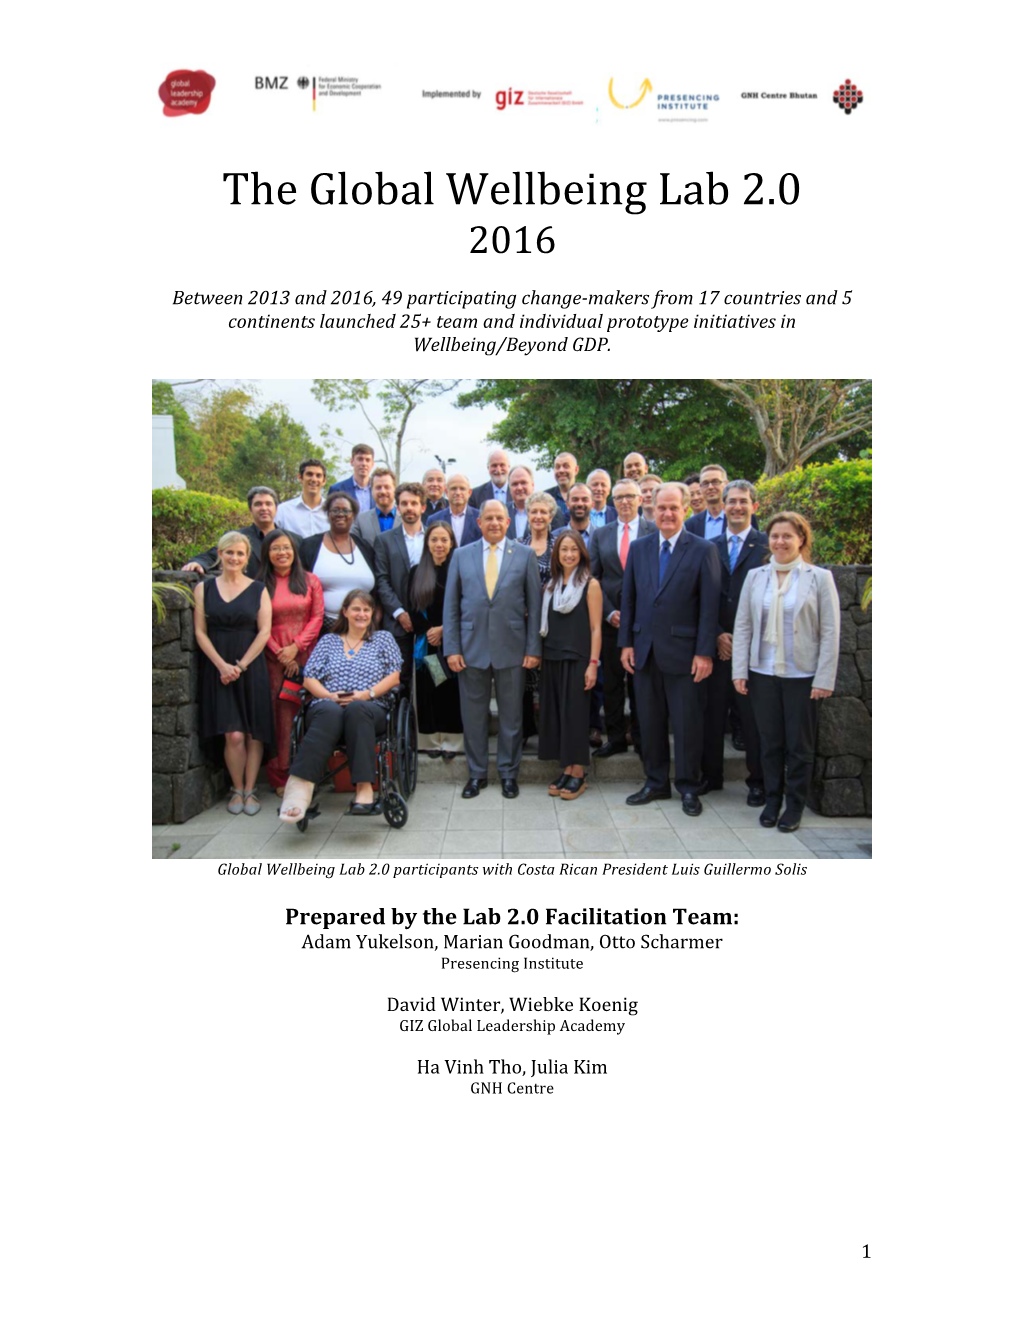 The Global Wellbeing Lab 2.0 2016